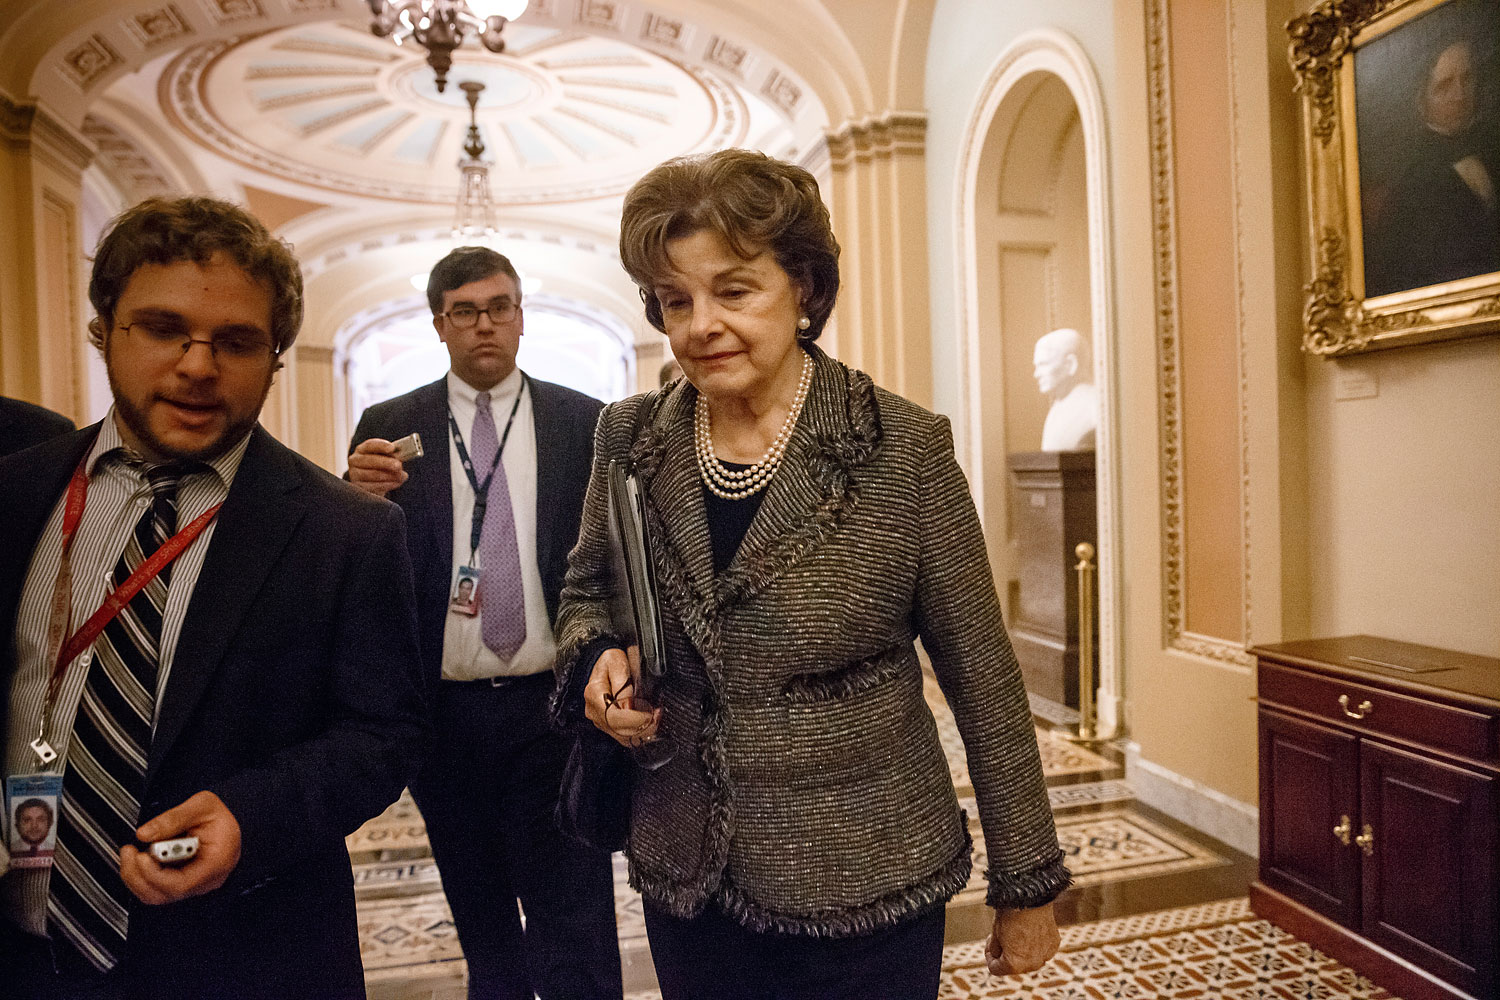 Sen. Dianne Feinstein, D-Calif., chair of the Senate Intelligence Committee, leaves the chamber at the Capitol in Washington, March 5, 2014. (J. Scott Applewhite—AP)